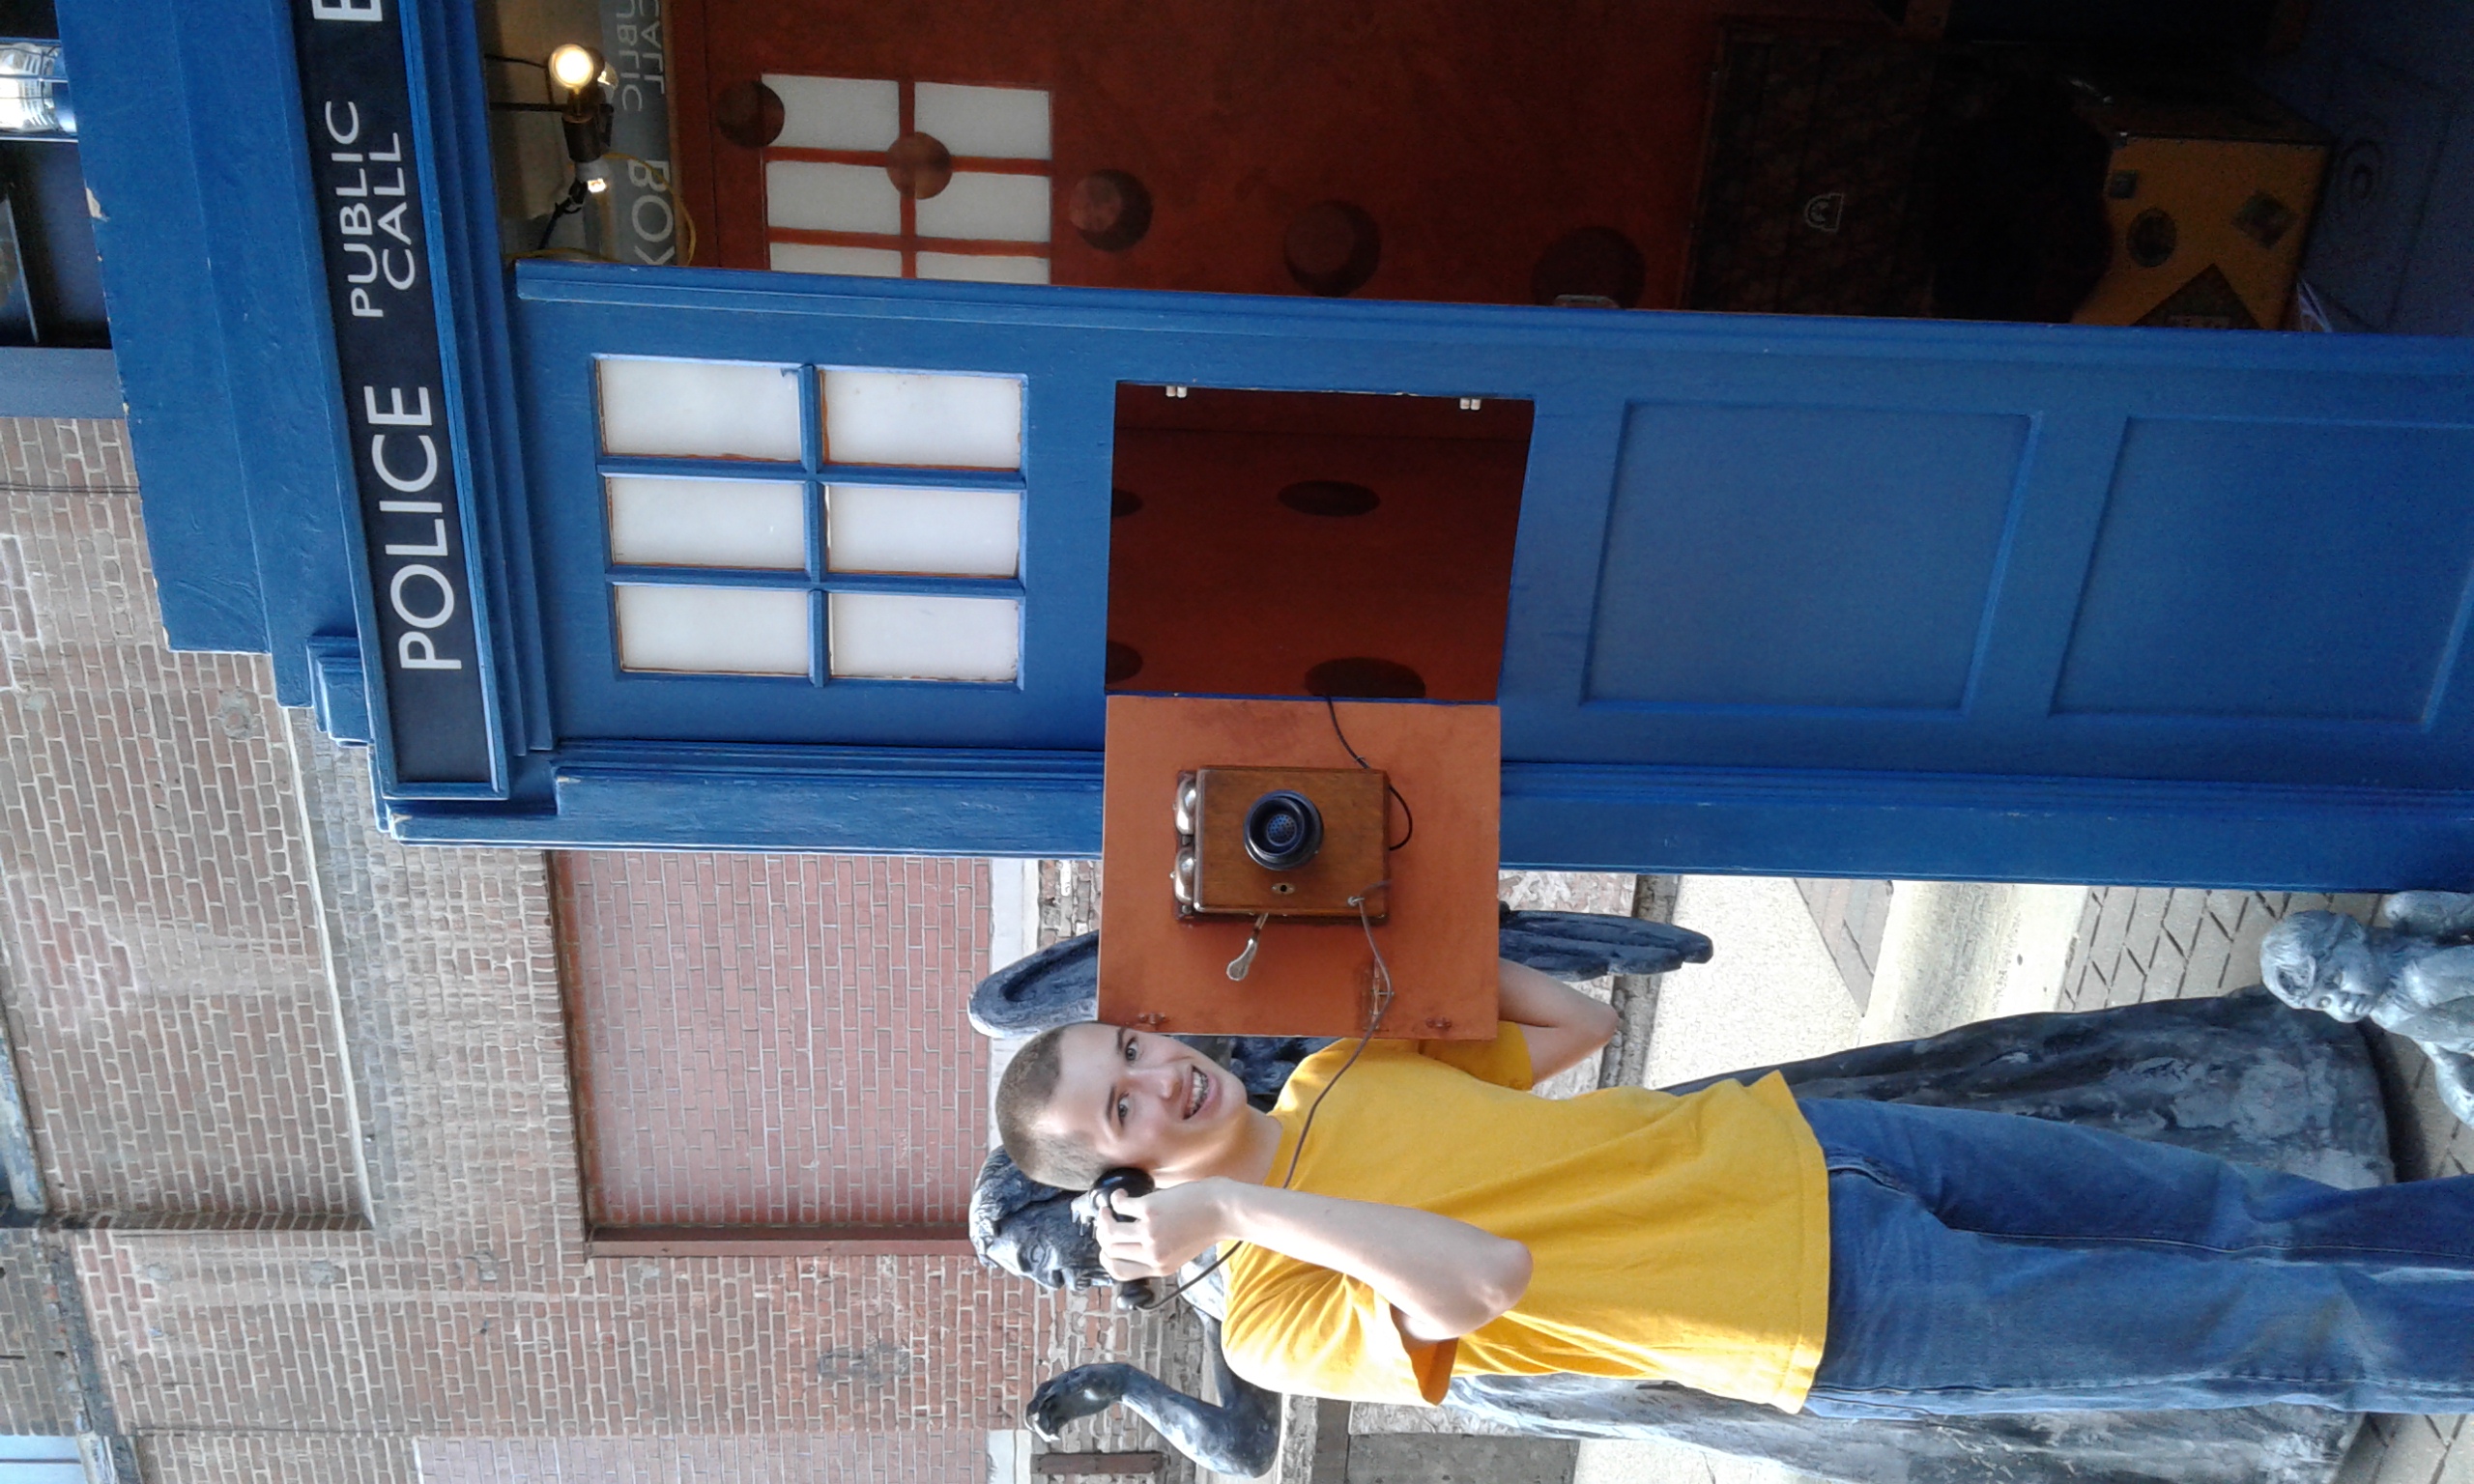 Me picking up the phone on the Tardis.